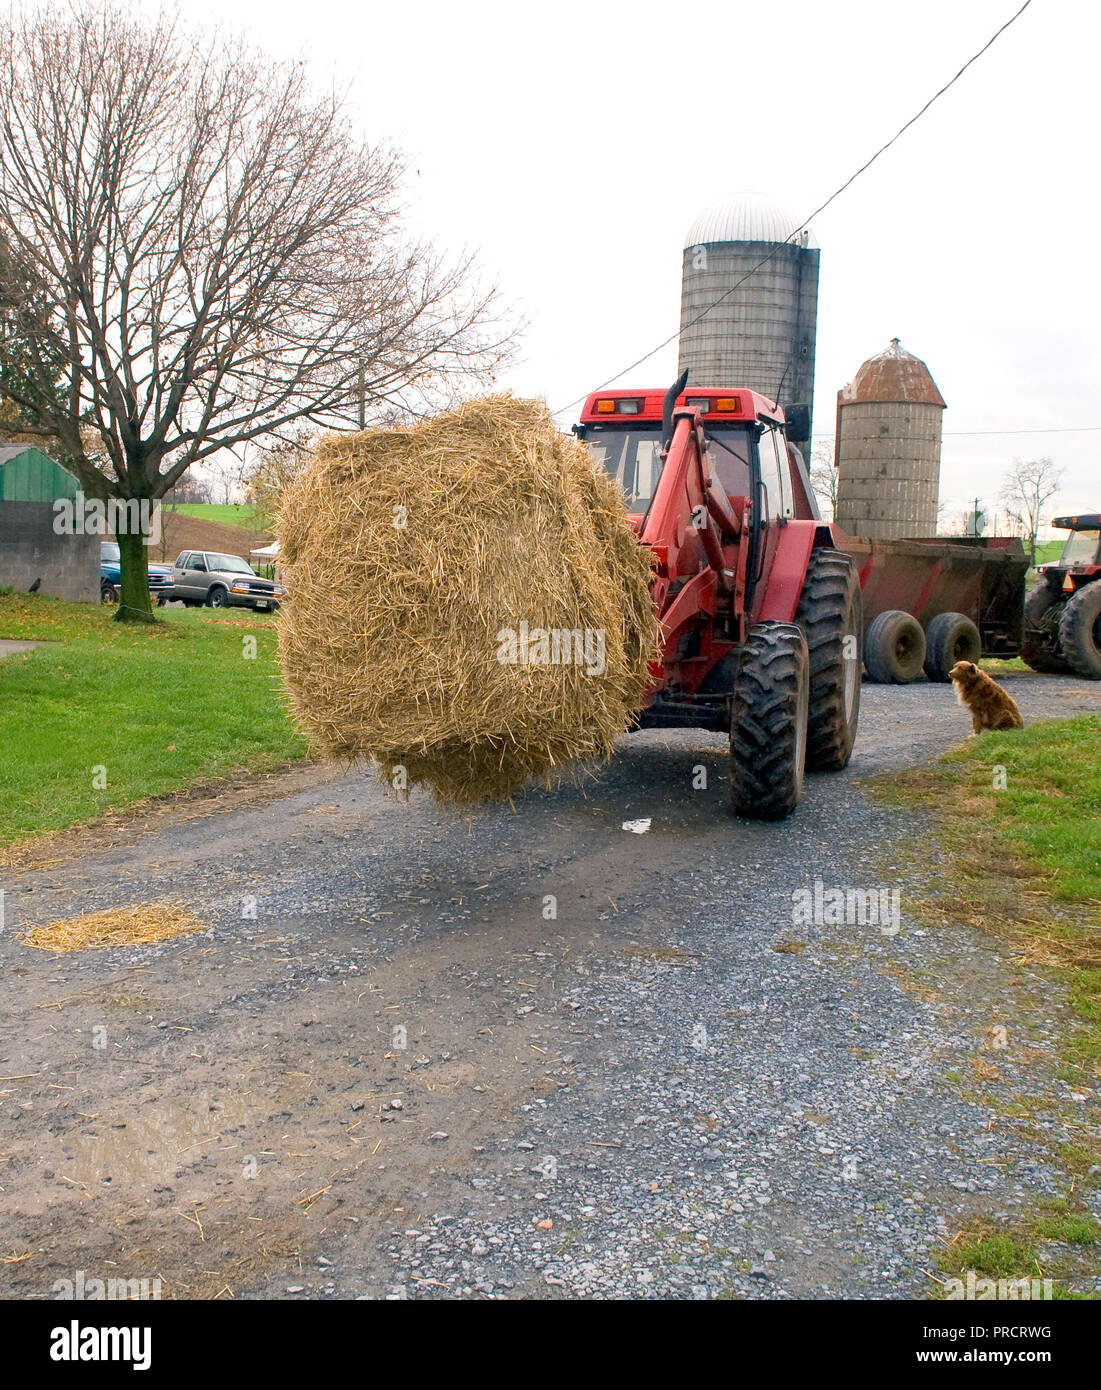 Farmer using tractor to move a round hay bale Stock Photo - Alamy